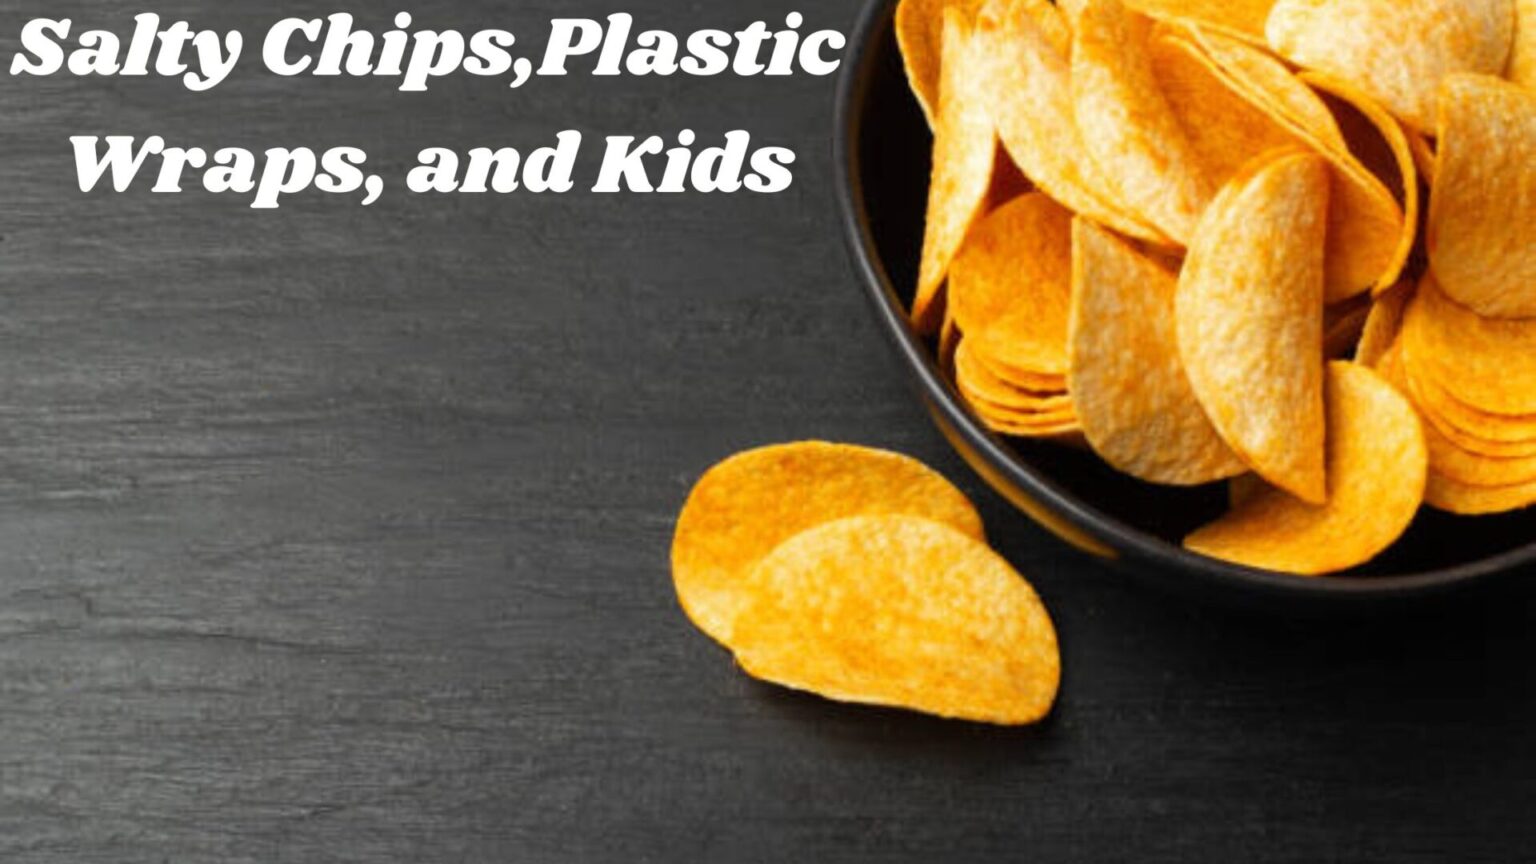 Salty Chips,Plastic Wraps, and Kids: A Closer Look at Irritability Triggers